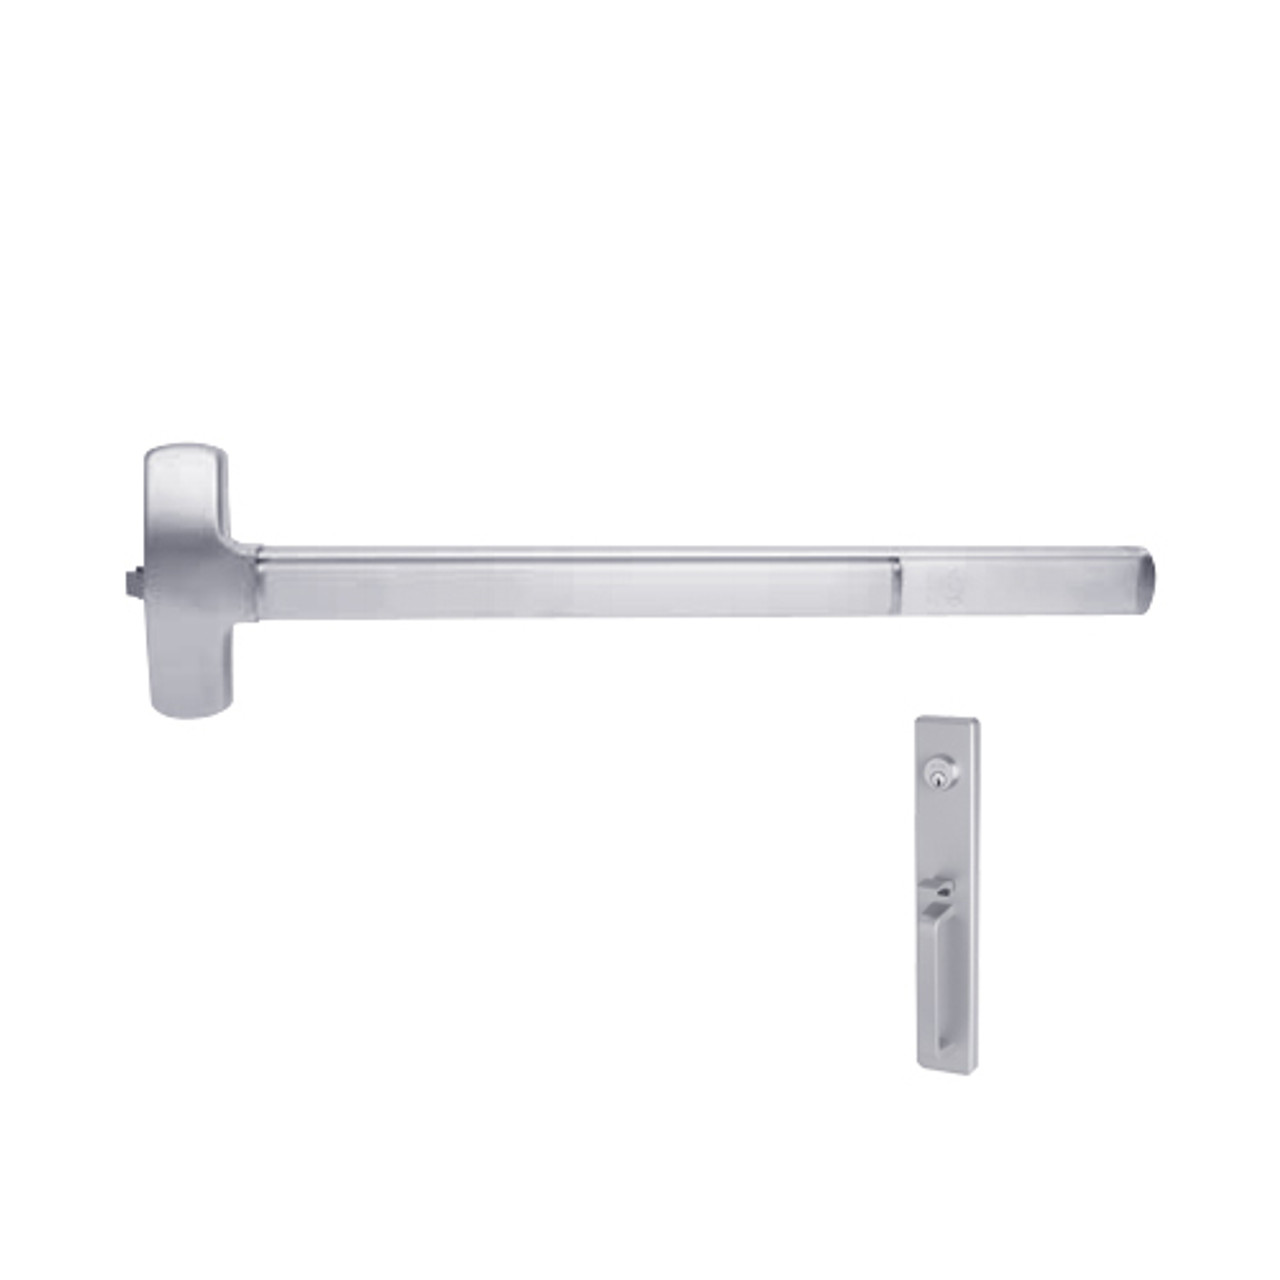 F-25-R-TP-US26-3 Falcon Exit Device in Polished Chrome